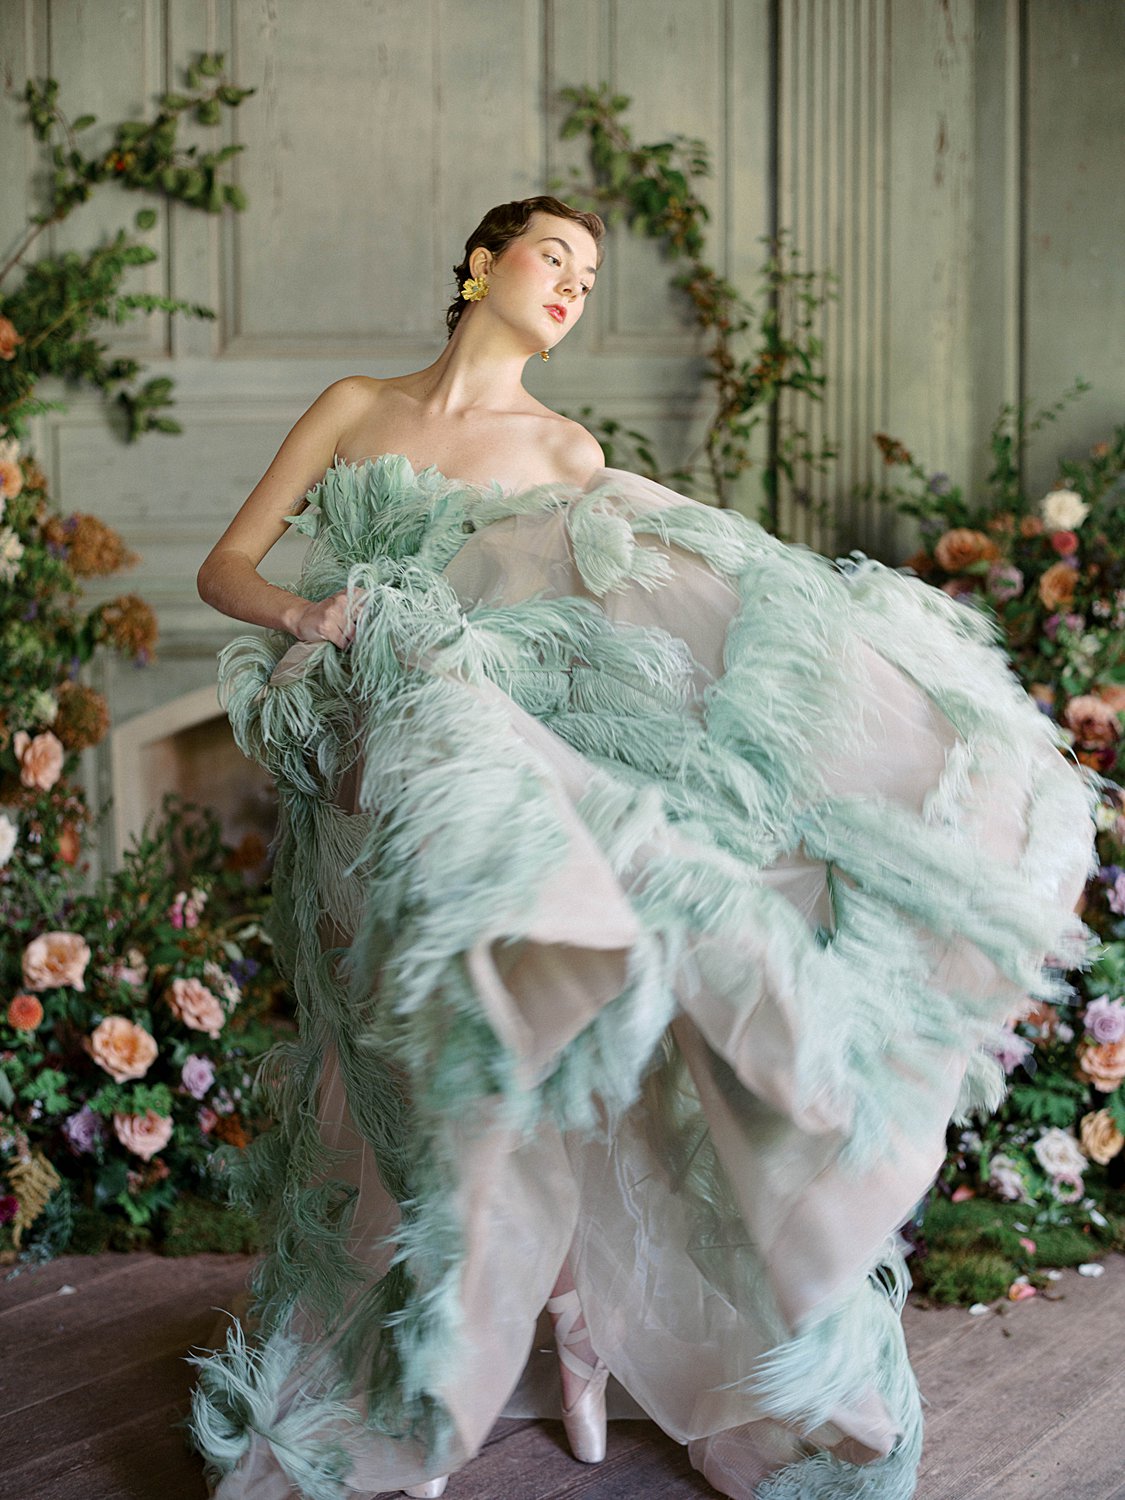 Fine Art Ballet Photo Shoot with Green Feather Gown